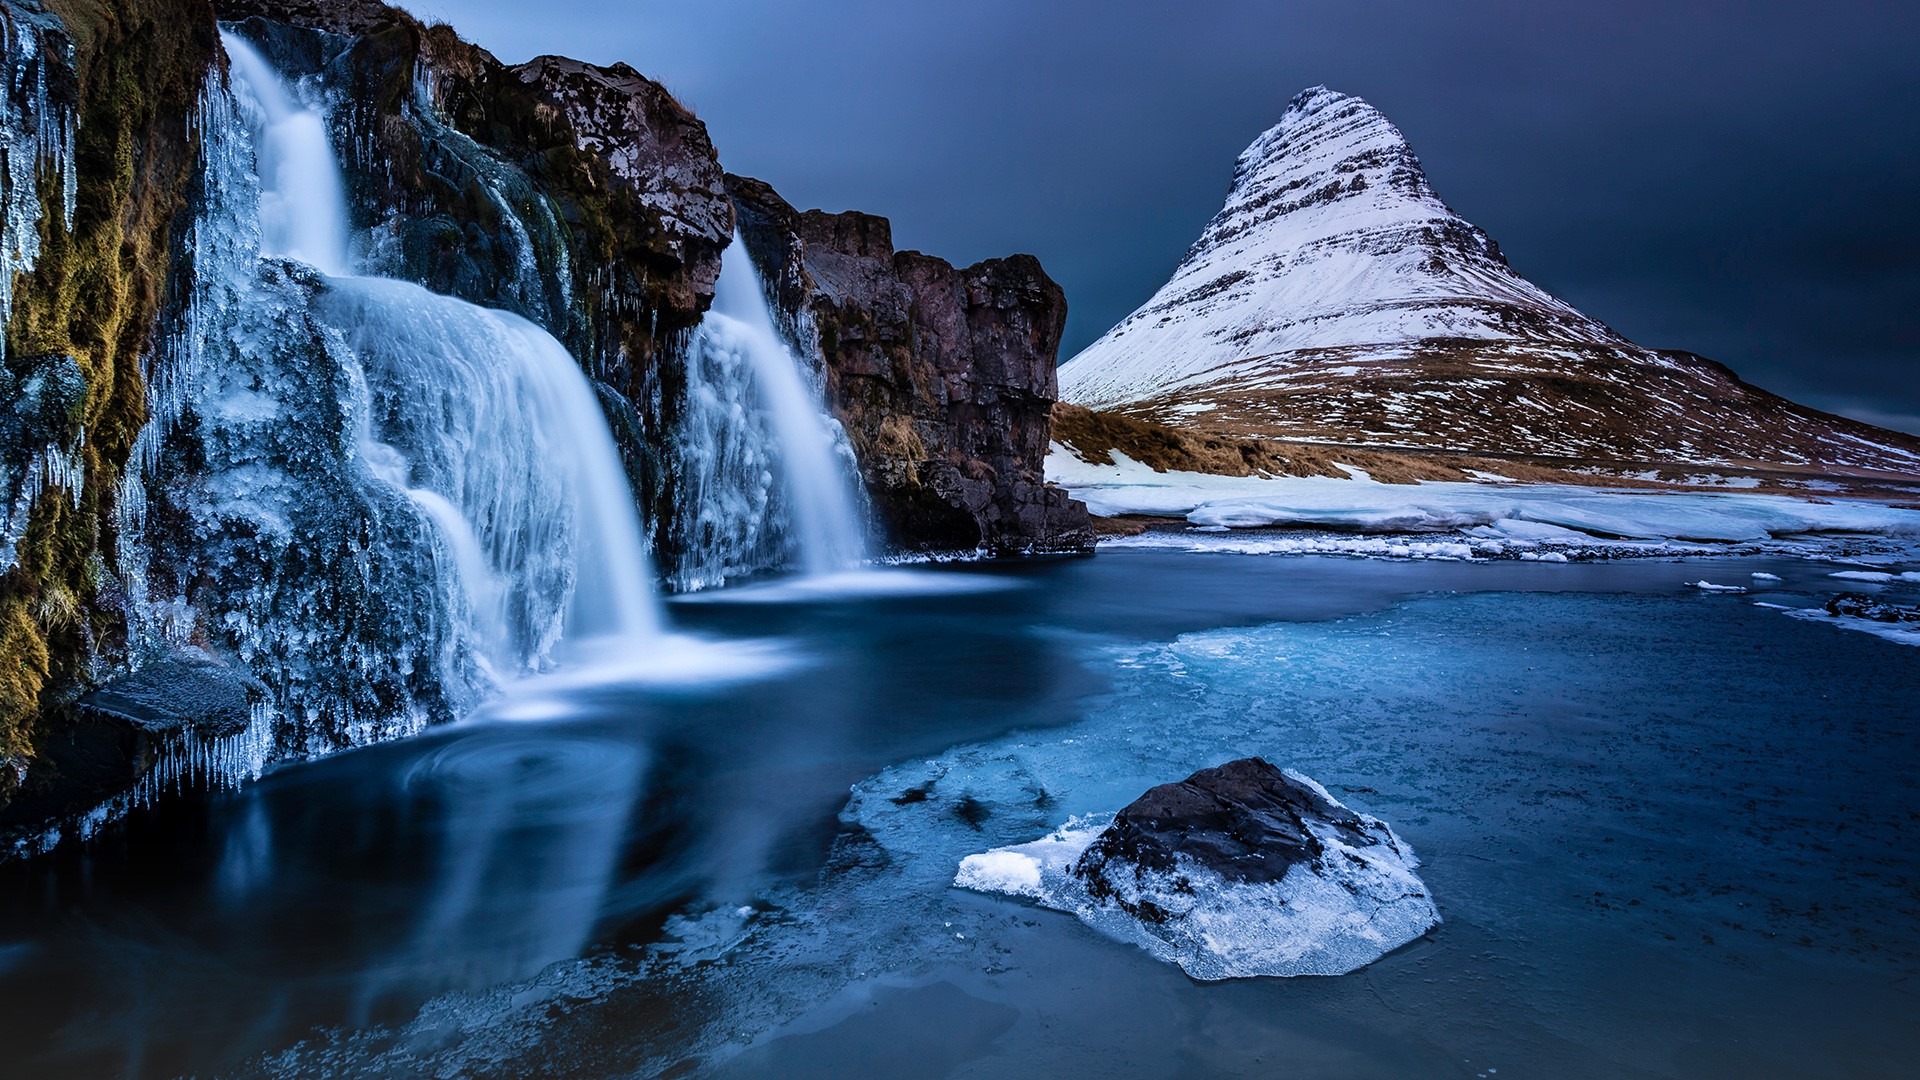 General 1920x1080 nature landscape snowy mountain waterfall lake long exposure Iceland Kirkjufell mountains water snow ice sky